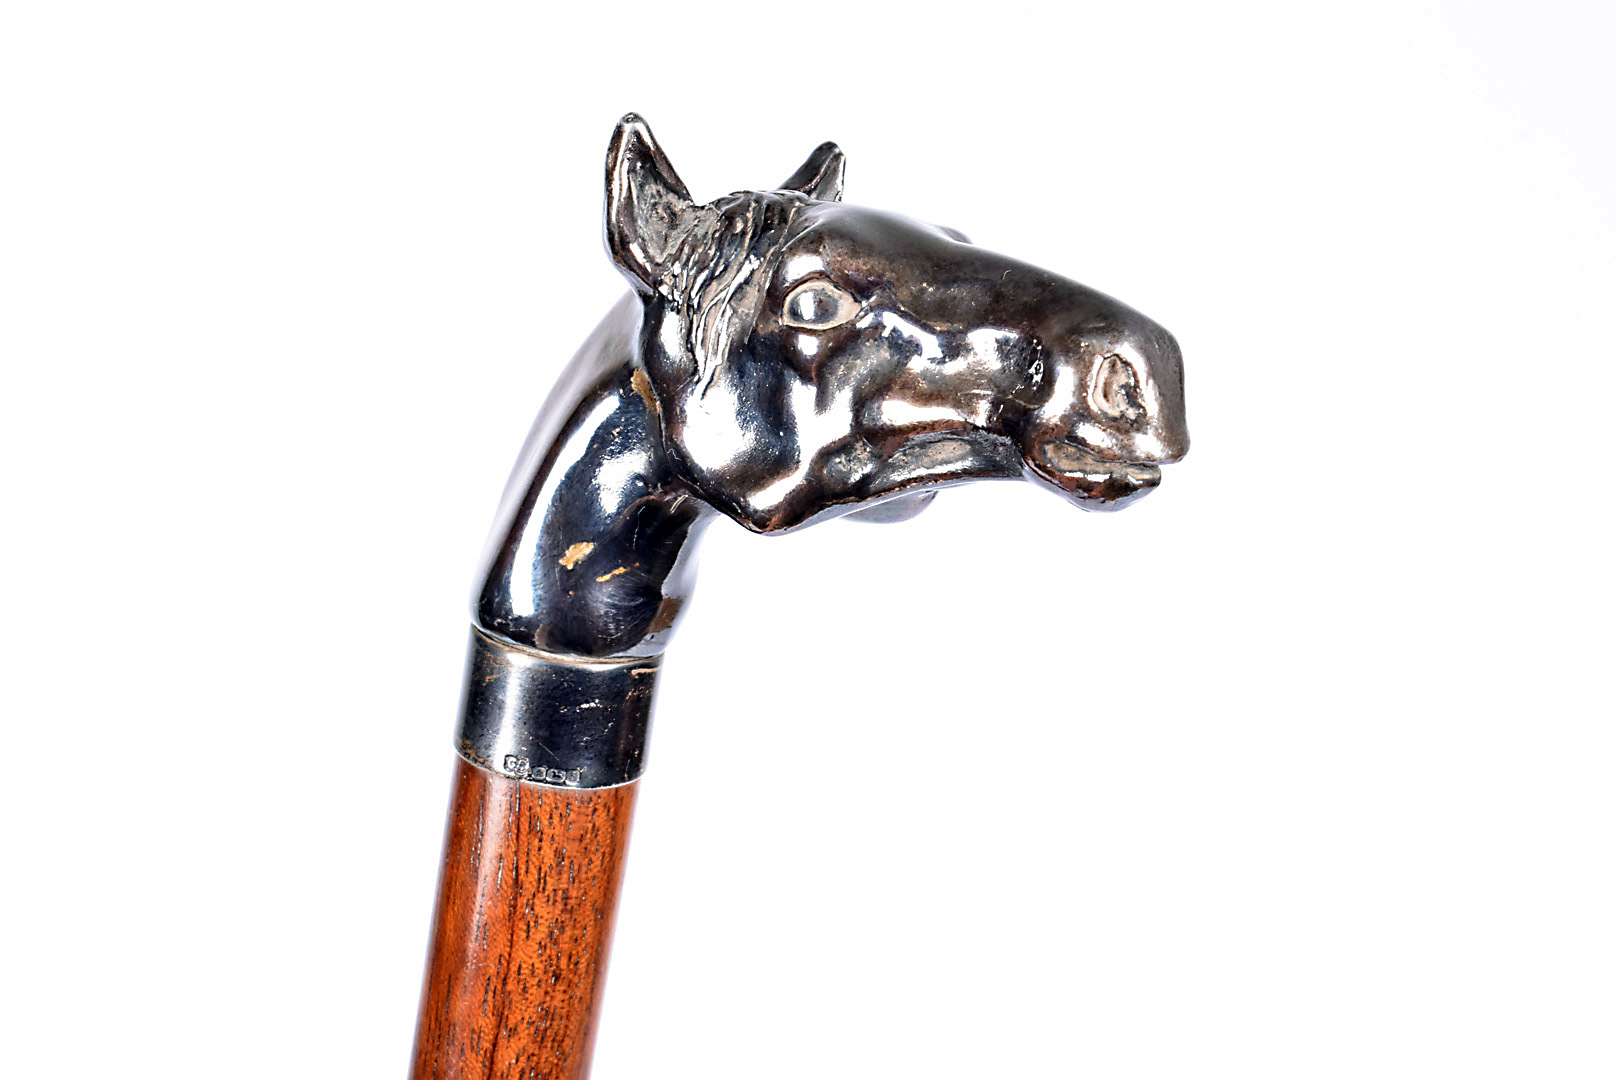 A silver plated horse head walking stick, the top in the form of a horse's head, leading down to